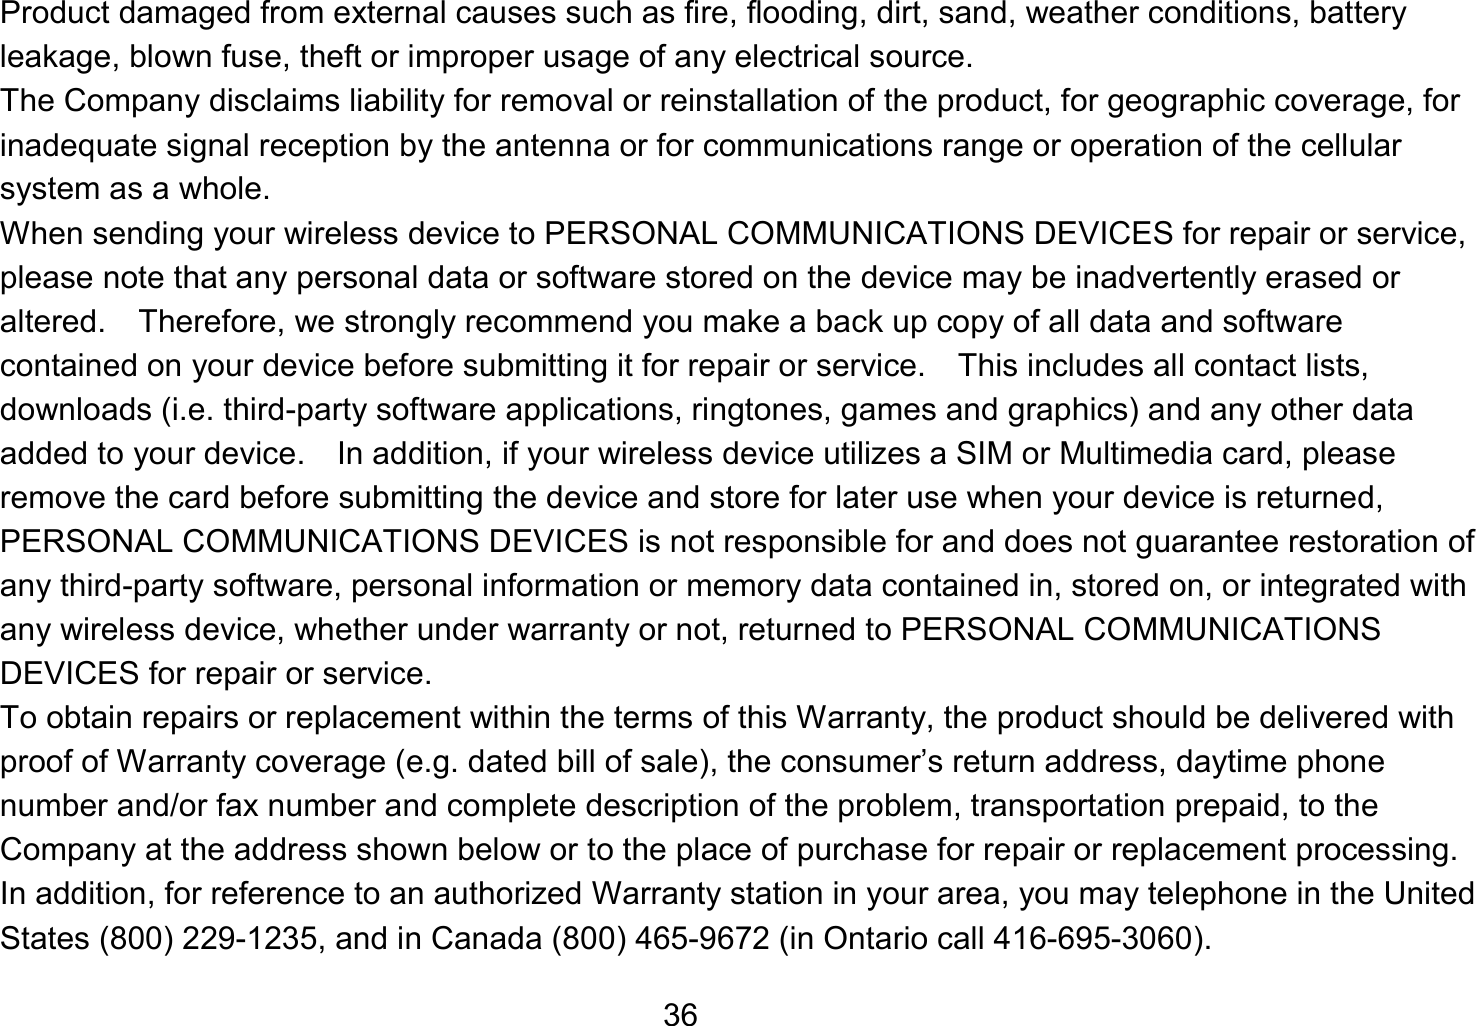   36Product damaged from external causes such as fire, flooding, dirt, sand, weather conditions, battery leakage, blown fuse, theft or improper usage of any electrical source. The Company disclaims liability for removal or reinstallation of the product, for geographic coverage, for inadequate signal reception by the antenna or for communications range or operation of the cellular system as a whole.   When sending your wireless device to PERSONAL COMMUNICATIONS DEVICES for repair or service, please note that any personal data or software stored on the device may be inadvertently erased or altered.    Therefore, we strongly recommend you make a back up copy of all data and software contained on your device before submitting it for repair or service.    This includes all contact lists, downloads (i.e. third-party software applications, ringtones, games and graphics) and any other data added to your device.    In addition, if your wireless device utilizes a SIM or Multimedia card, please remove the card before submitting the device and store for later use when your device is returned, PERSONAL COMMUNICATIONS DEVICES is not responsible for and does not guarantee restoration of any third-party software, personal information or memory data contained in, stored on, or integrated with any wireless device, whether under warranty or not, returned to PERSONAL COMMUNICATIONS DEVICES for repair or service.     To obtain repairs or replacement within the terms of this Warranty, the product should be delivered with proof of Warranty coverage (e.g. dated bill of sale), the consumer’s return address, daytime phone number and/or fax number and complete description of the problem, transportation prepaid, to the Company at the address shown below or to the place of purchase for repair or replacement processing.   In addition, for reference to an authorized Warranty station in your area, you may telephone in the United States (800) 229-1235, and in Canada (800) 465-9672 (in Ontario call 416-695-3060). 